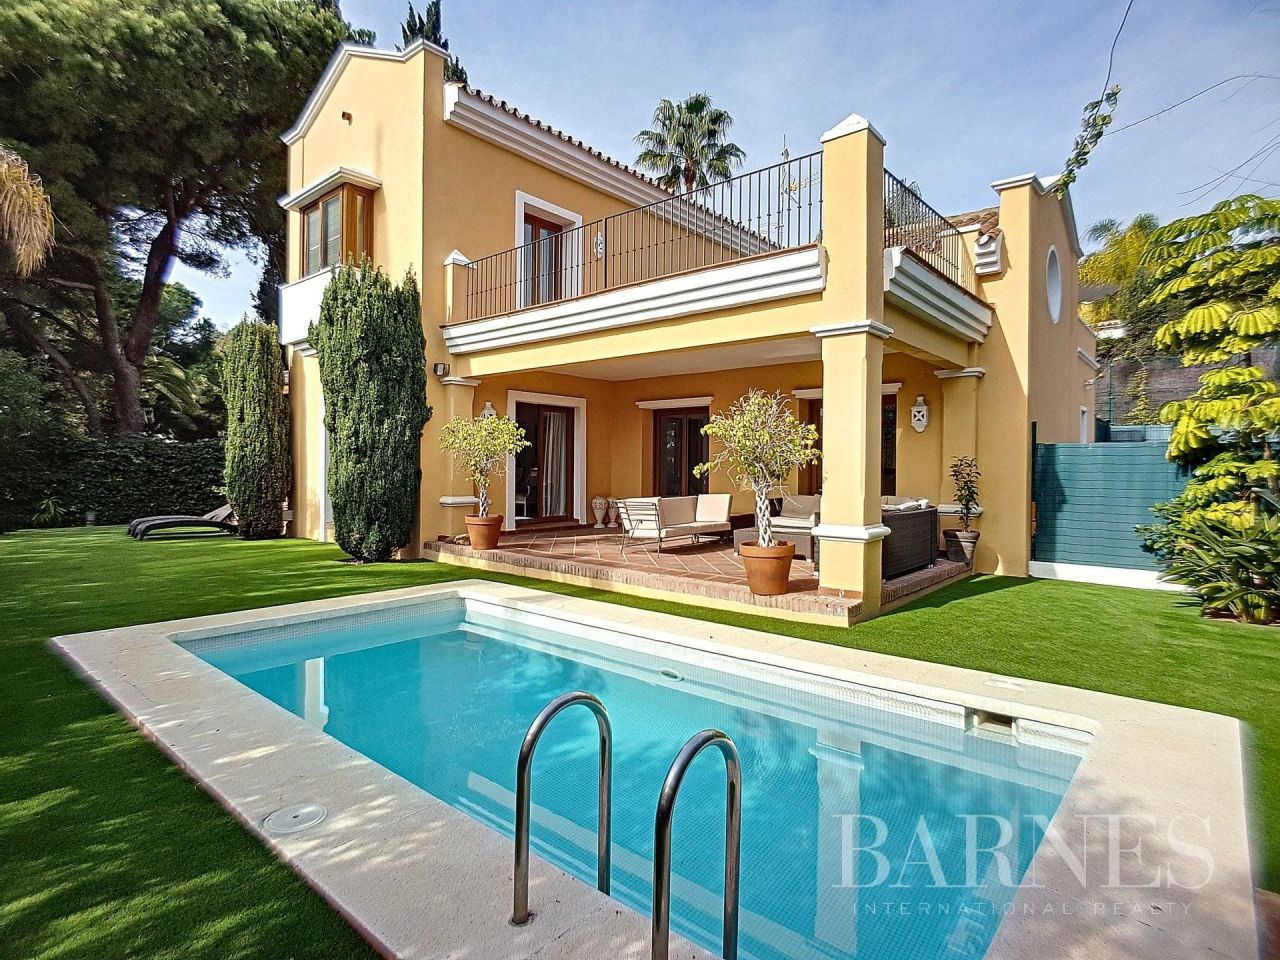 House in Marbella, Spain - picture 1